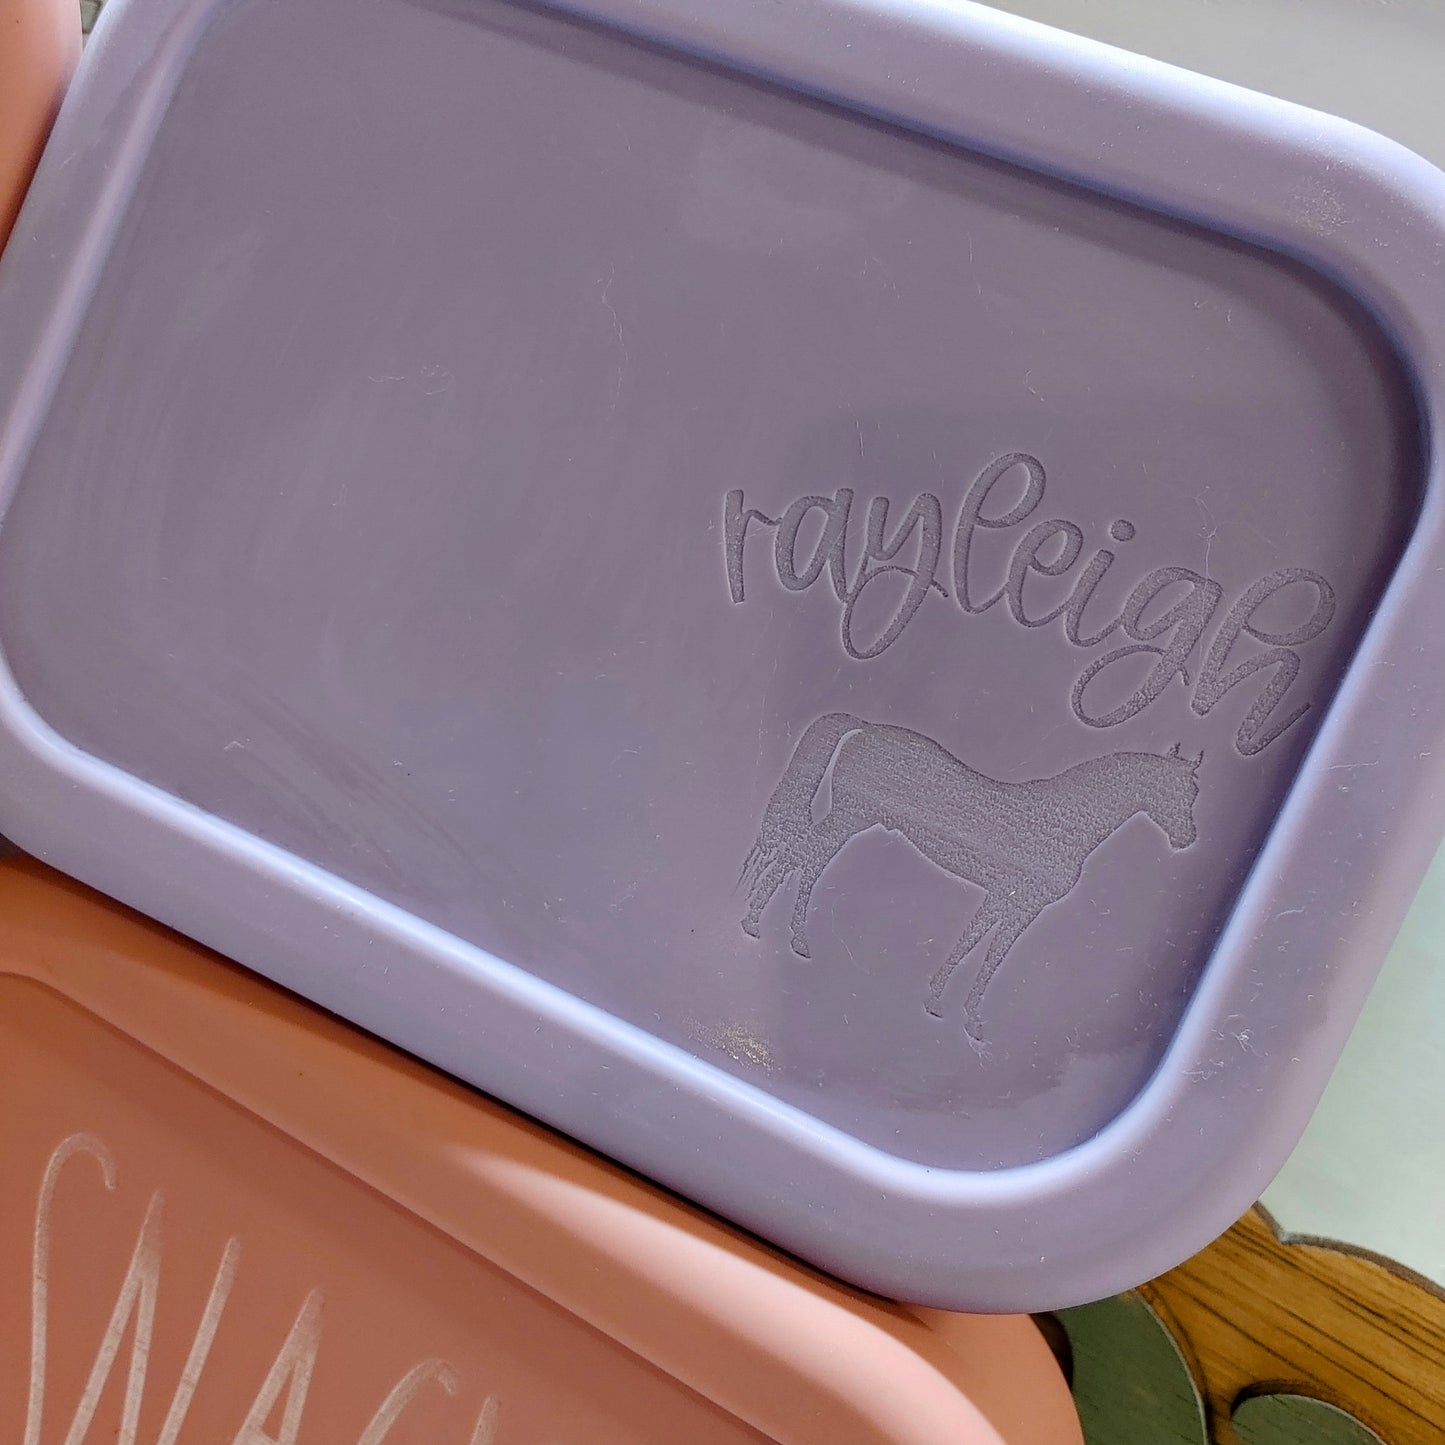 Personalized Silicone Bento Lunch Box: Personalized Lunch Box